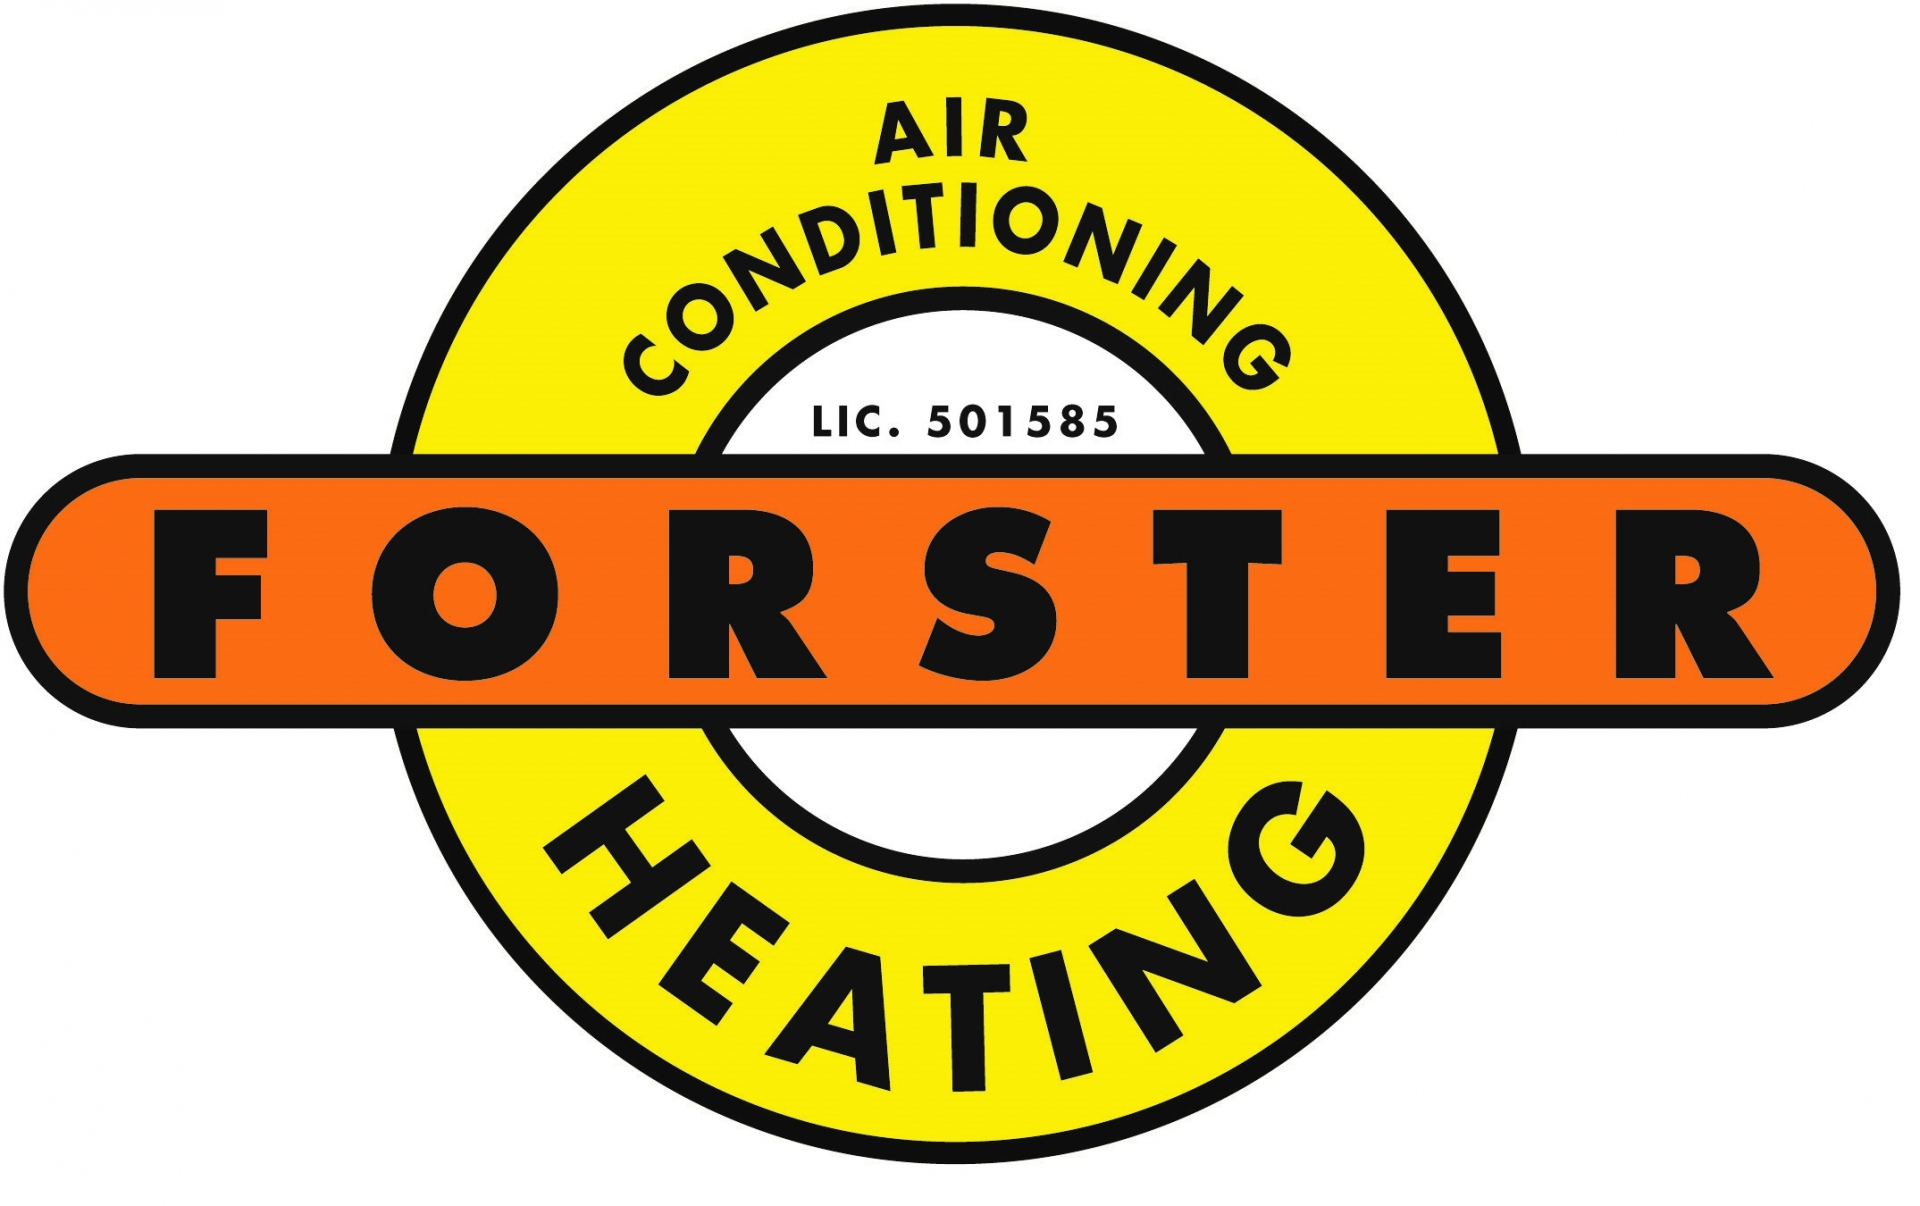 Forster Heating, Air Conditioning and Sheet Metal company logo